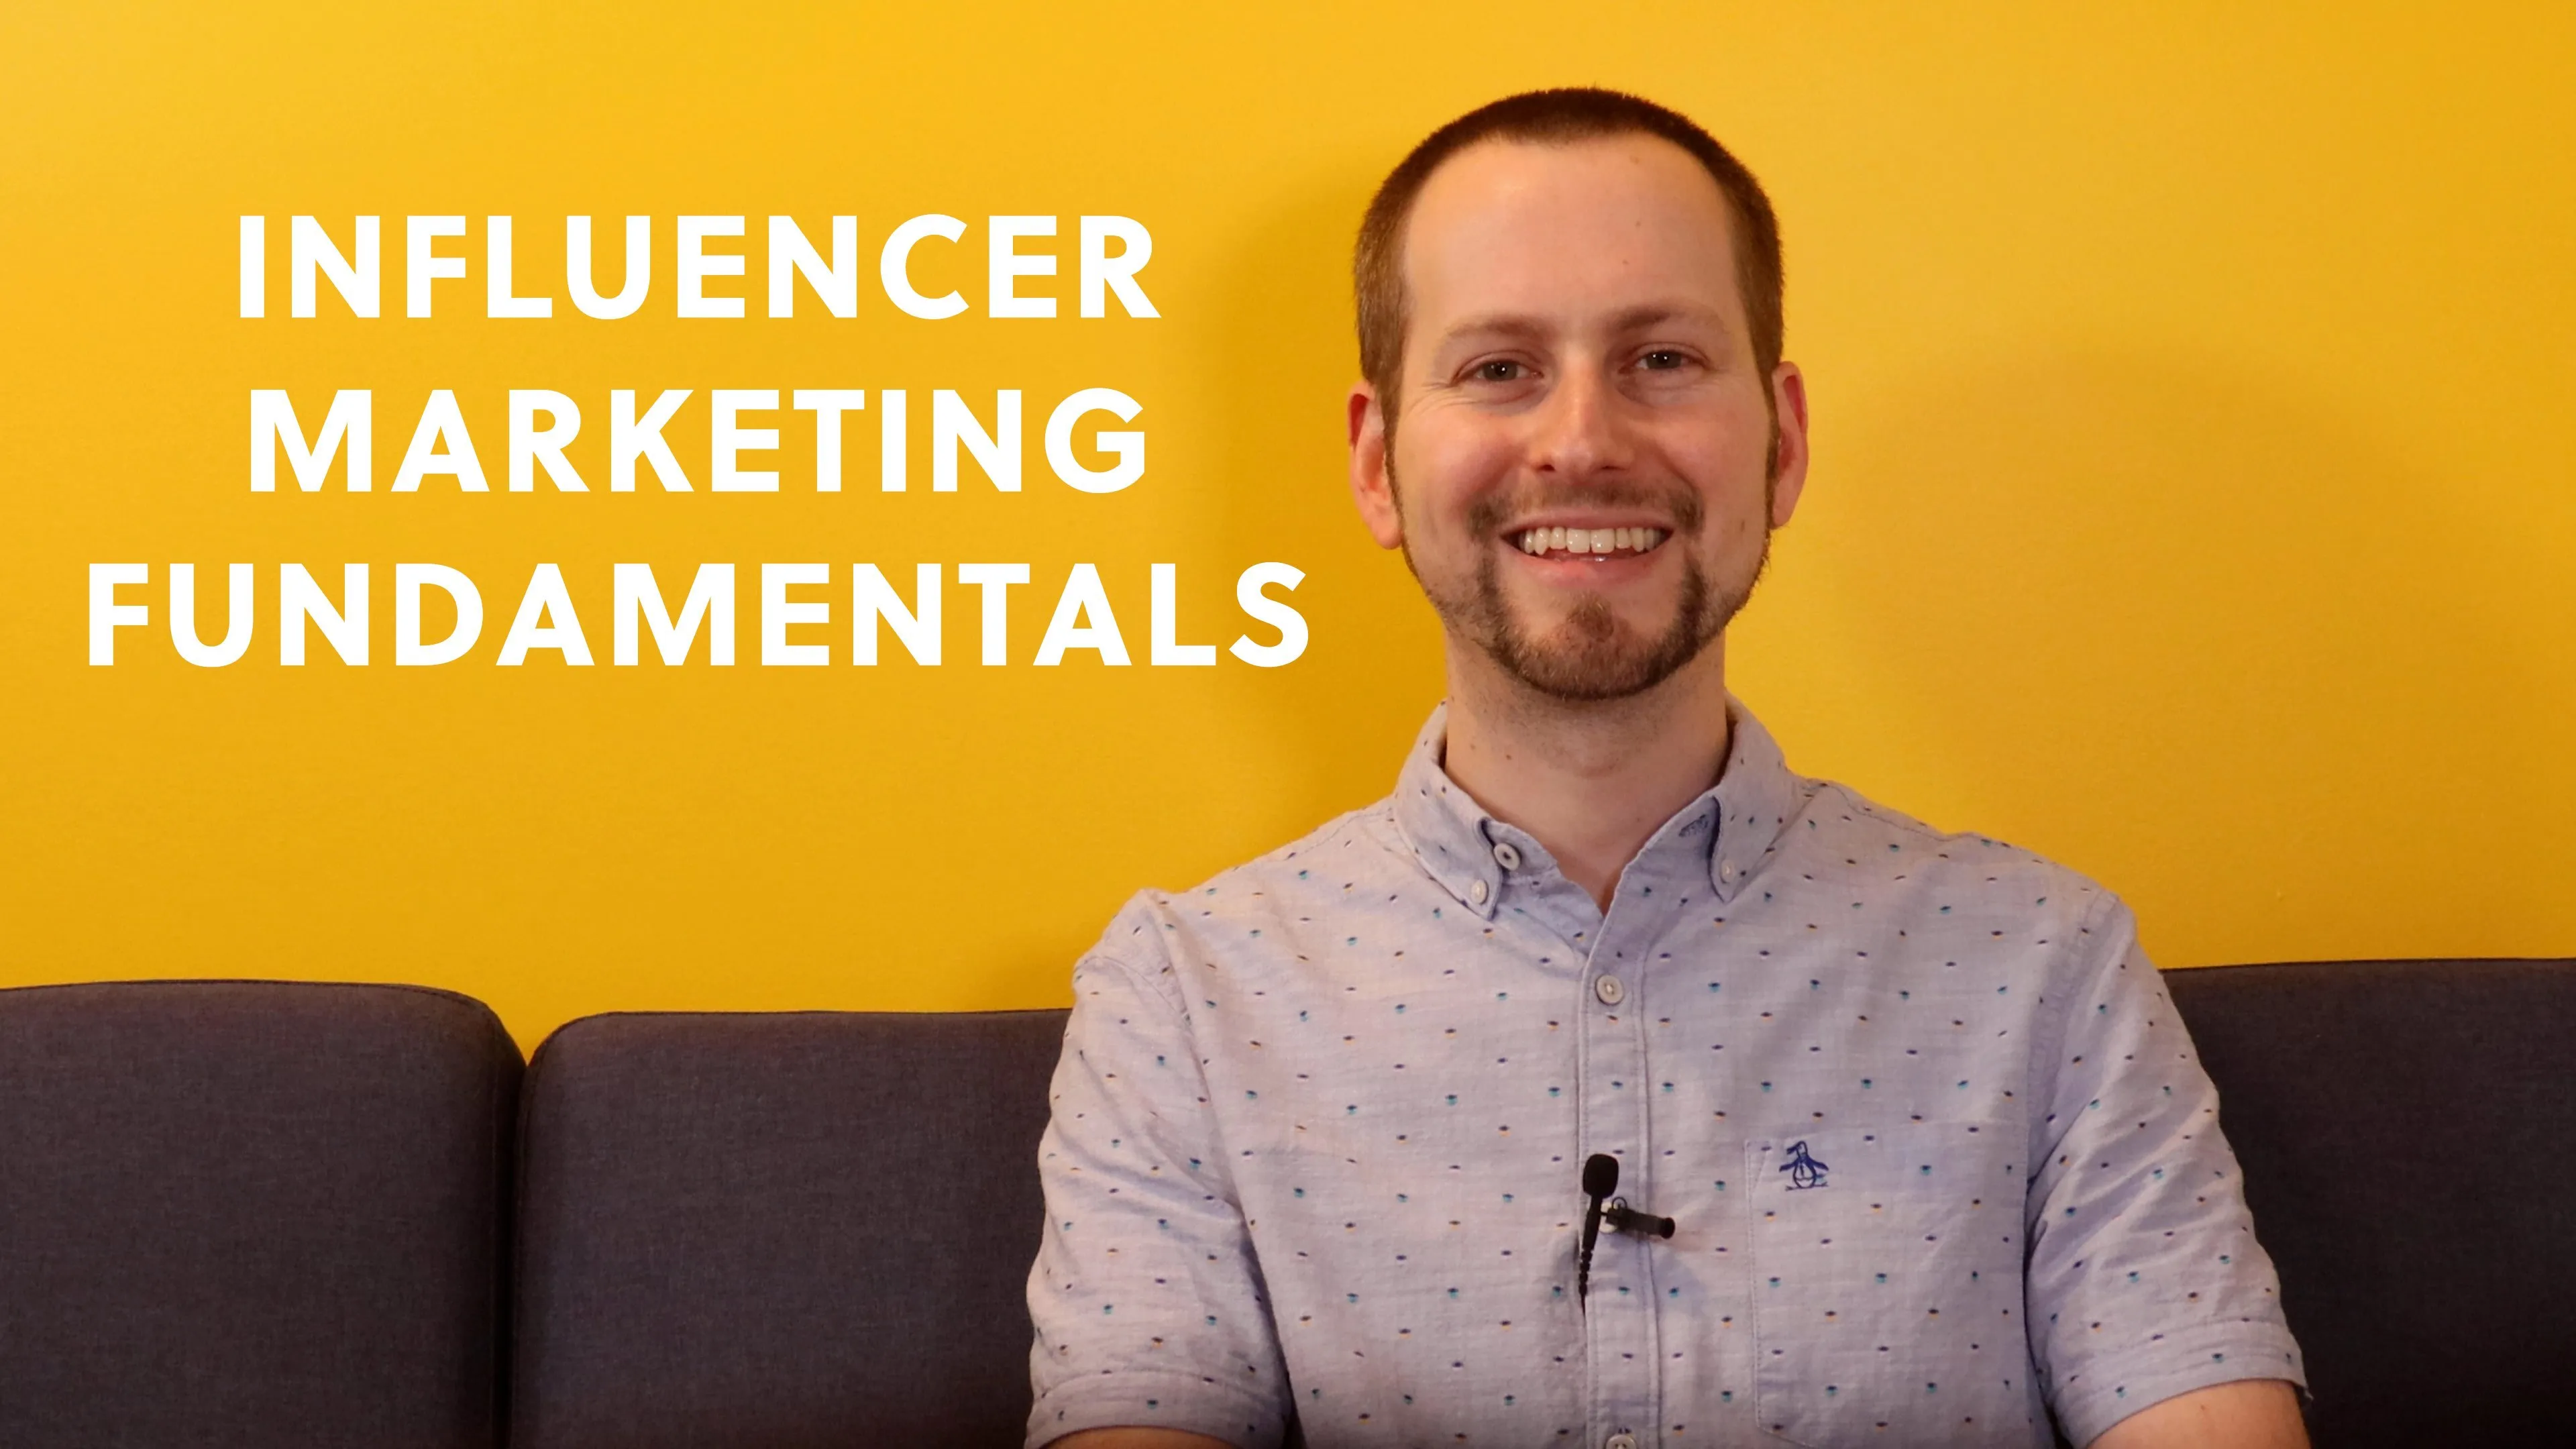 Influencer Marketing Fundamentals: How to Create an Impactful Campaign